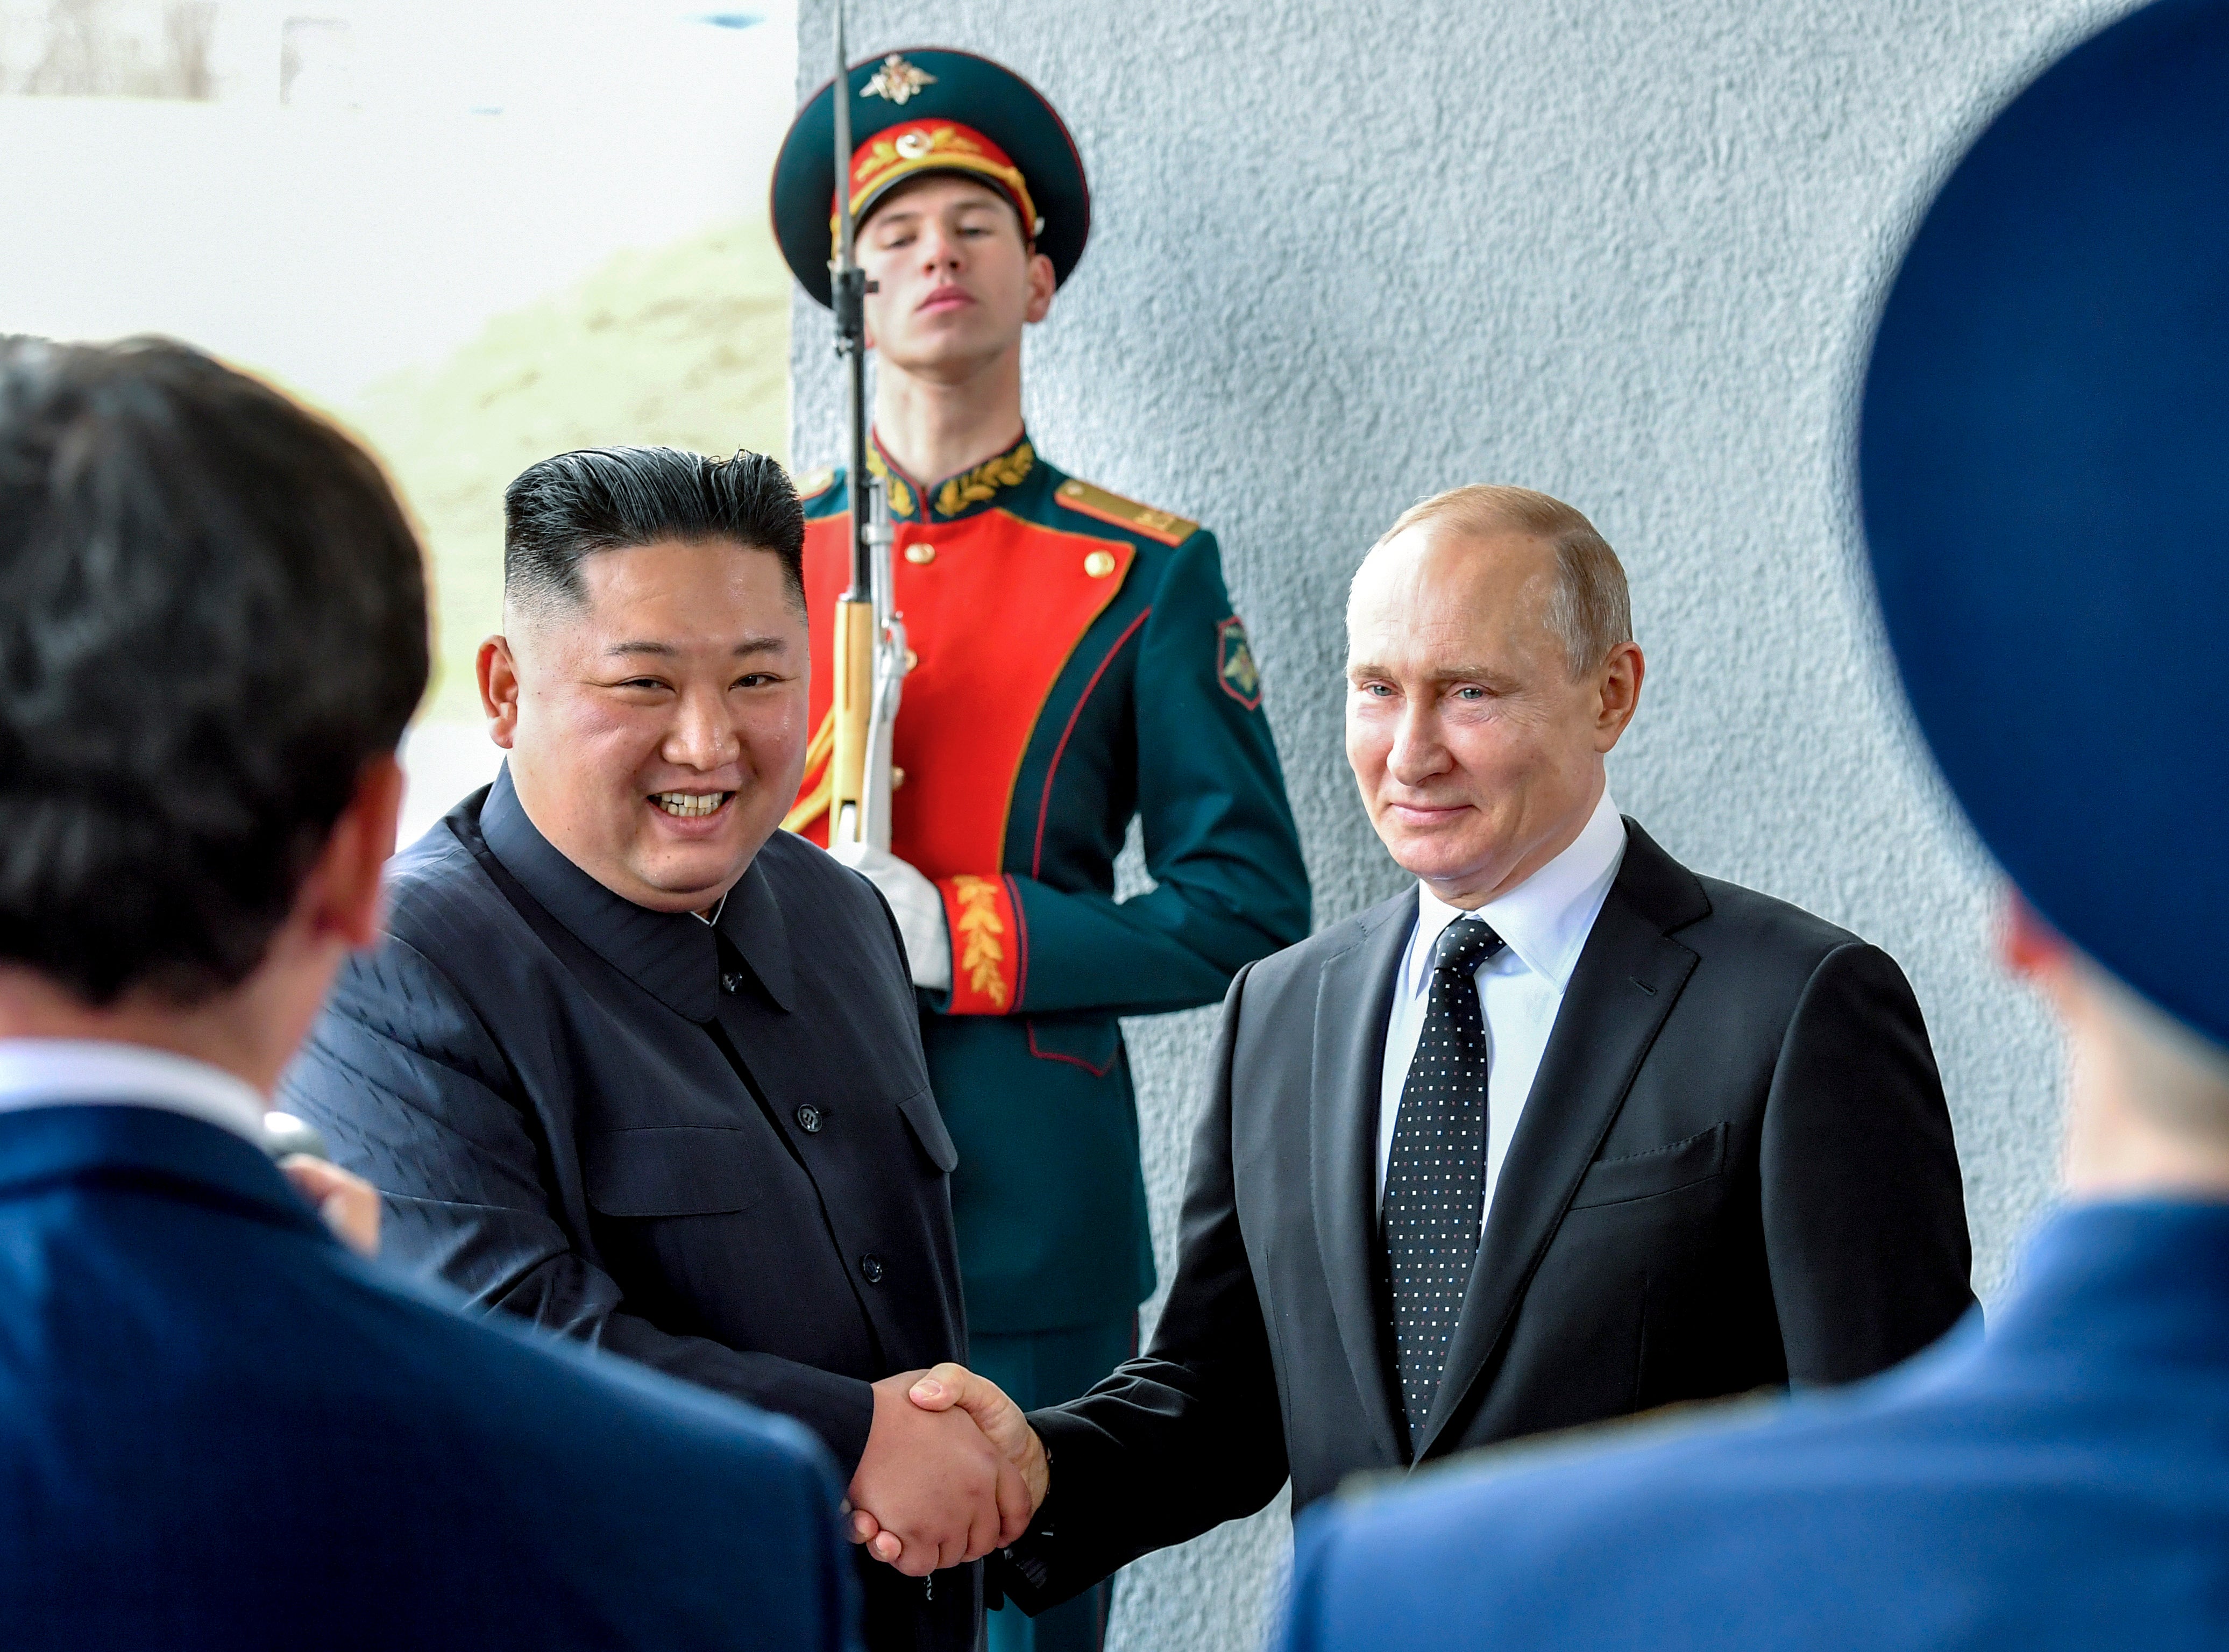 The fact that Kim Jong-un is the one travelling abroad suggests that he wants the meeting quite as much, or more, than Putin does